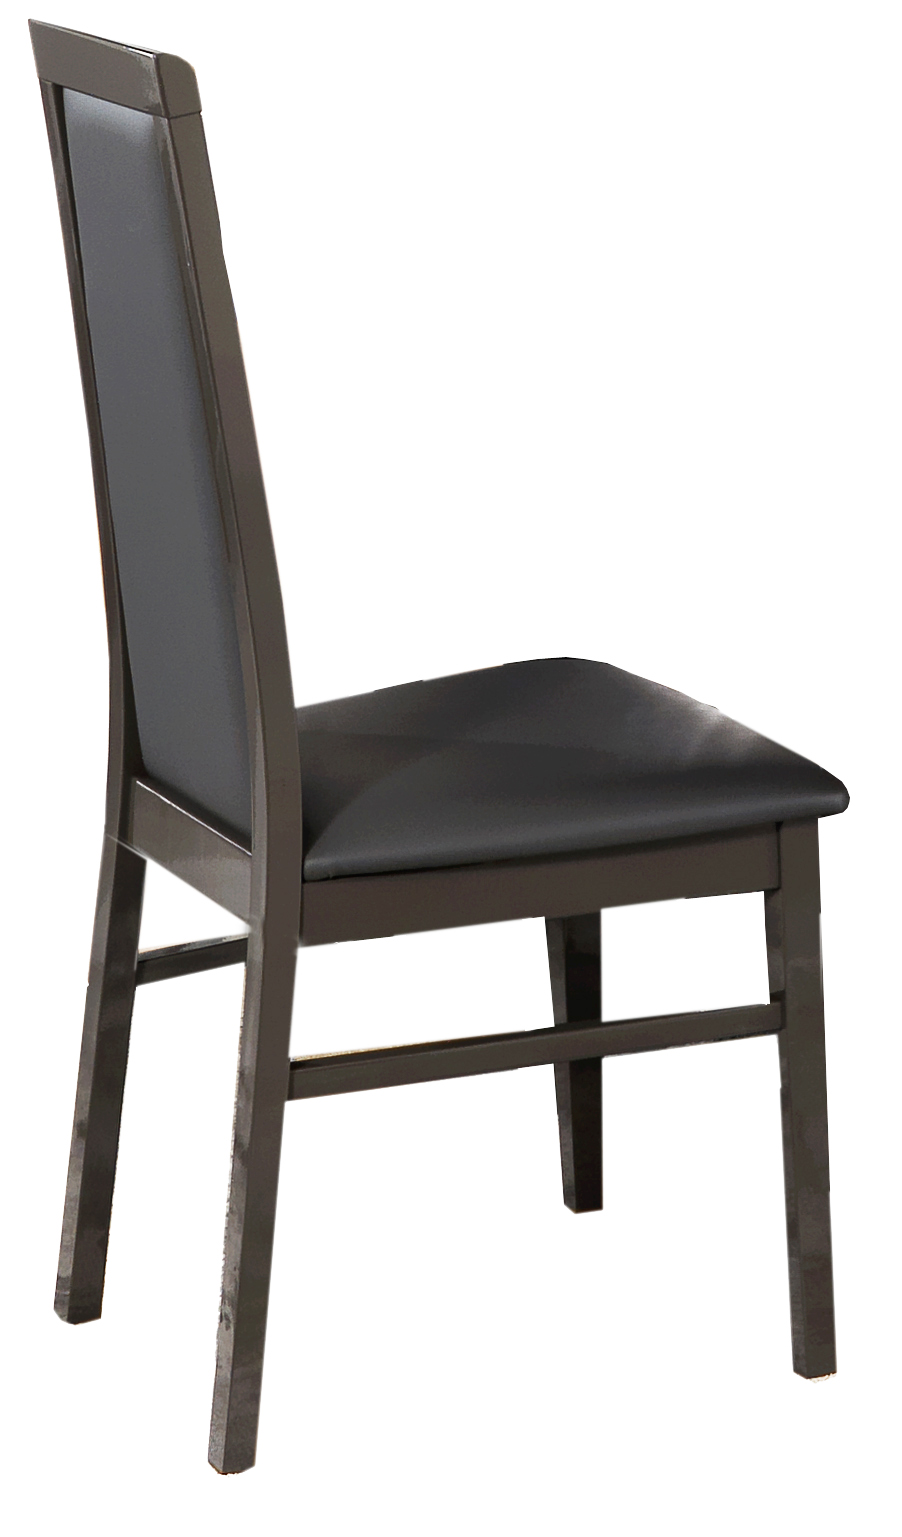 Dining Room Furniture Tables Oxford Dining Chair